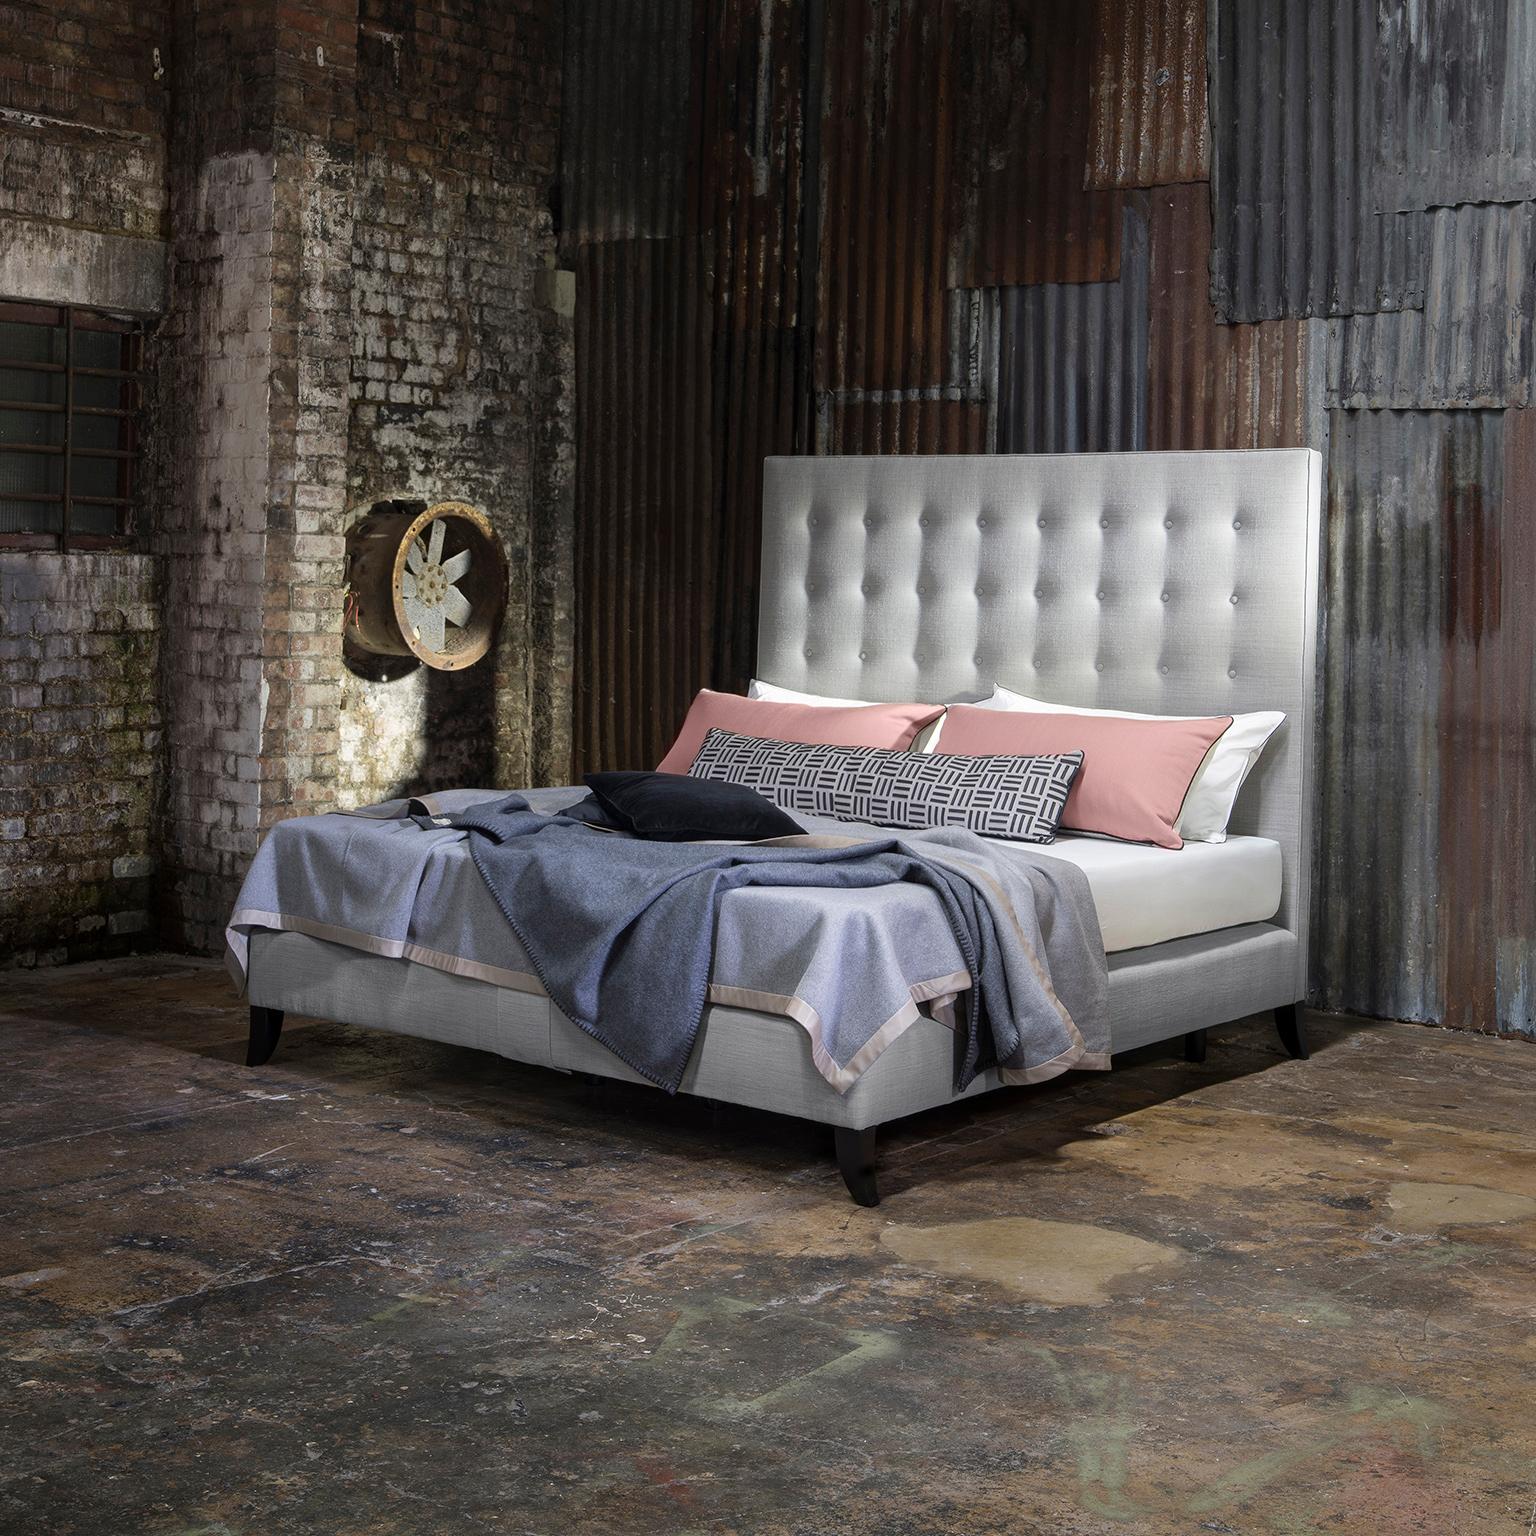 Featuring a statement headboard with classic styling, the Holly bed oozes timeless style. The oversized headboard with its undulated buttoning and piped edge embraces a modern metropolitan feel. Upholstered in subtle textured grey linen from Mark